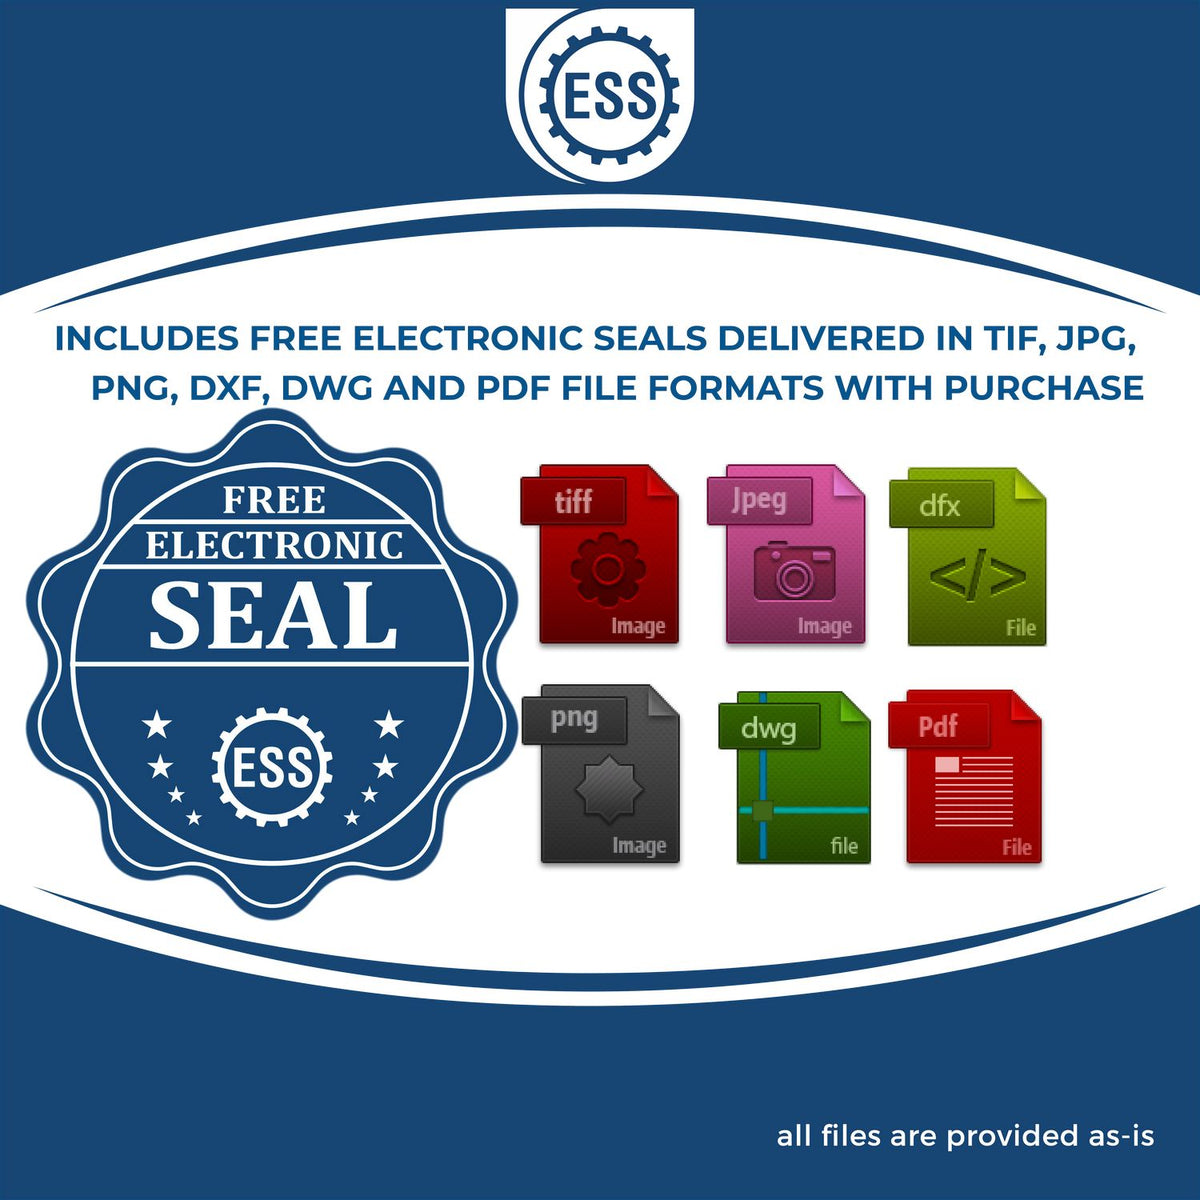 An infographic for the free electronic seal for the Slim Pre-Inked New York Architect Seal Stamp illustrating the different file type icons such as DXF, DWG, TIF, JPG and PNG.